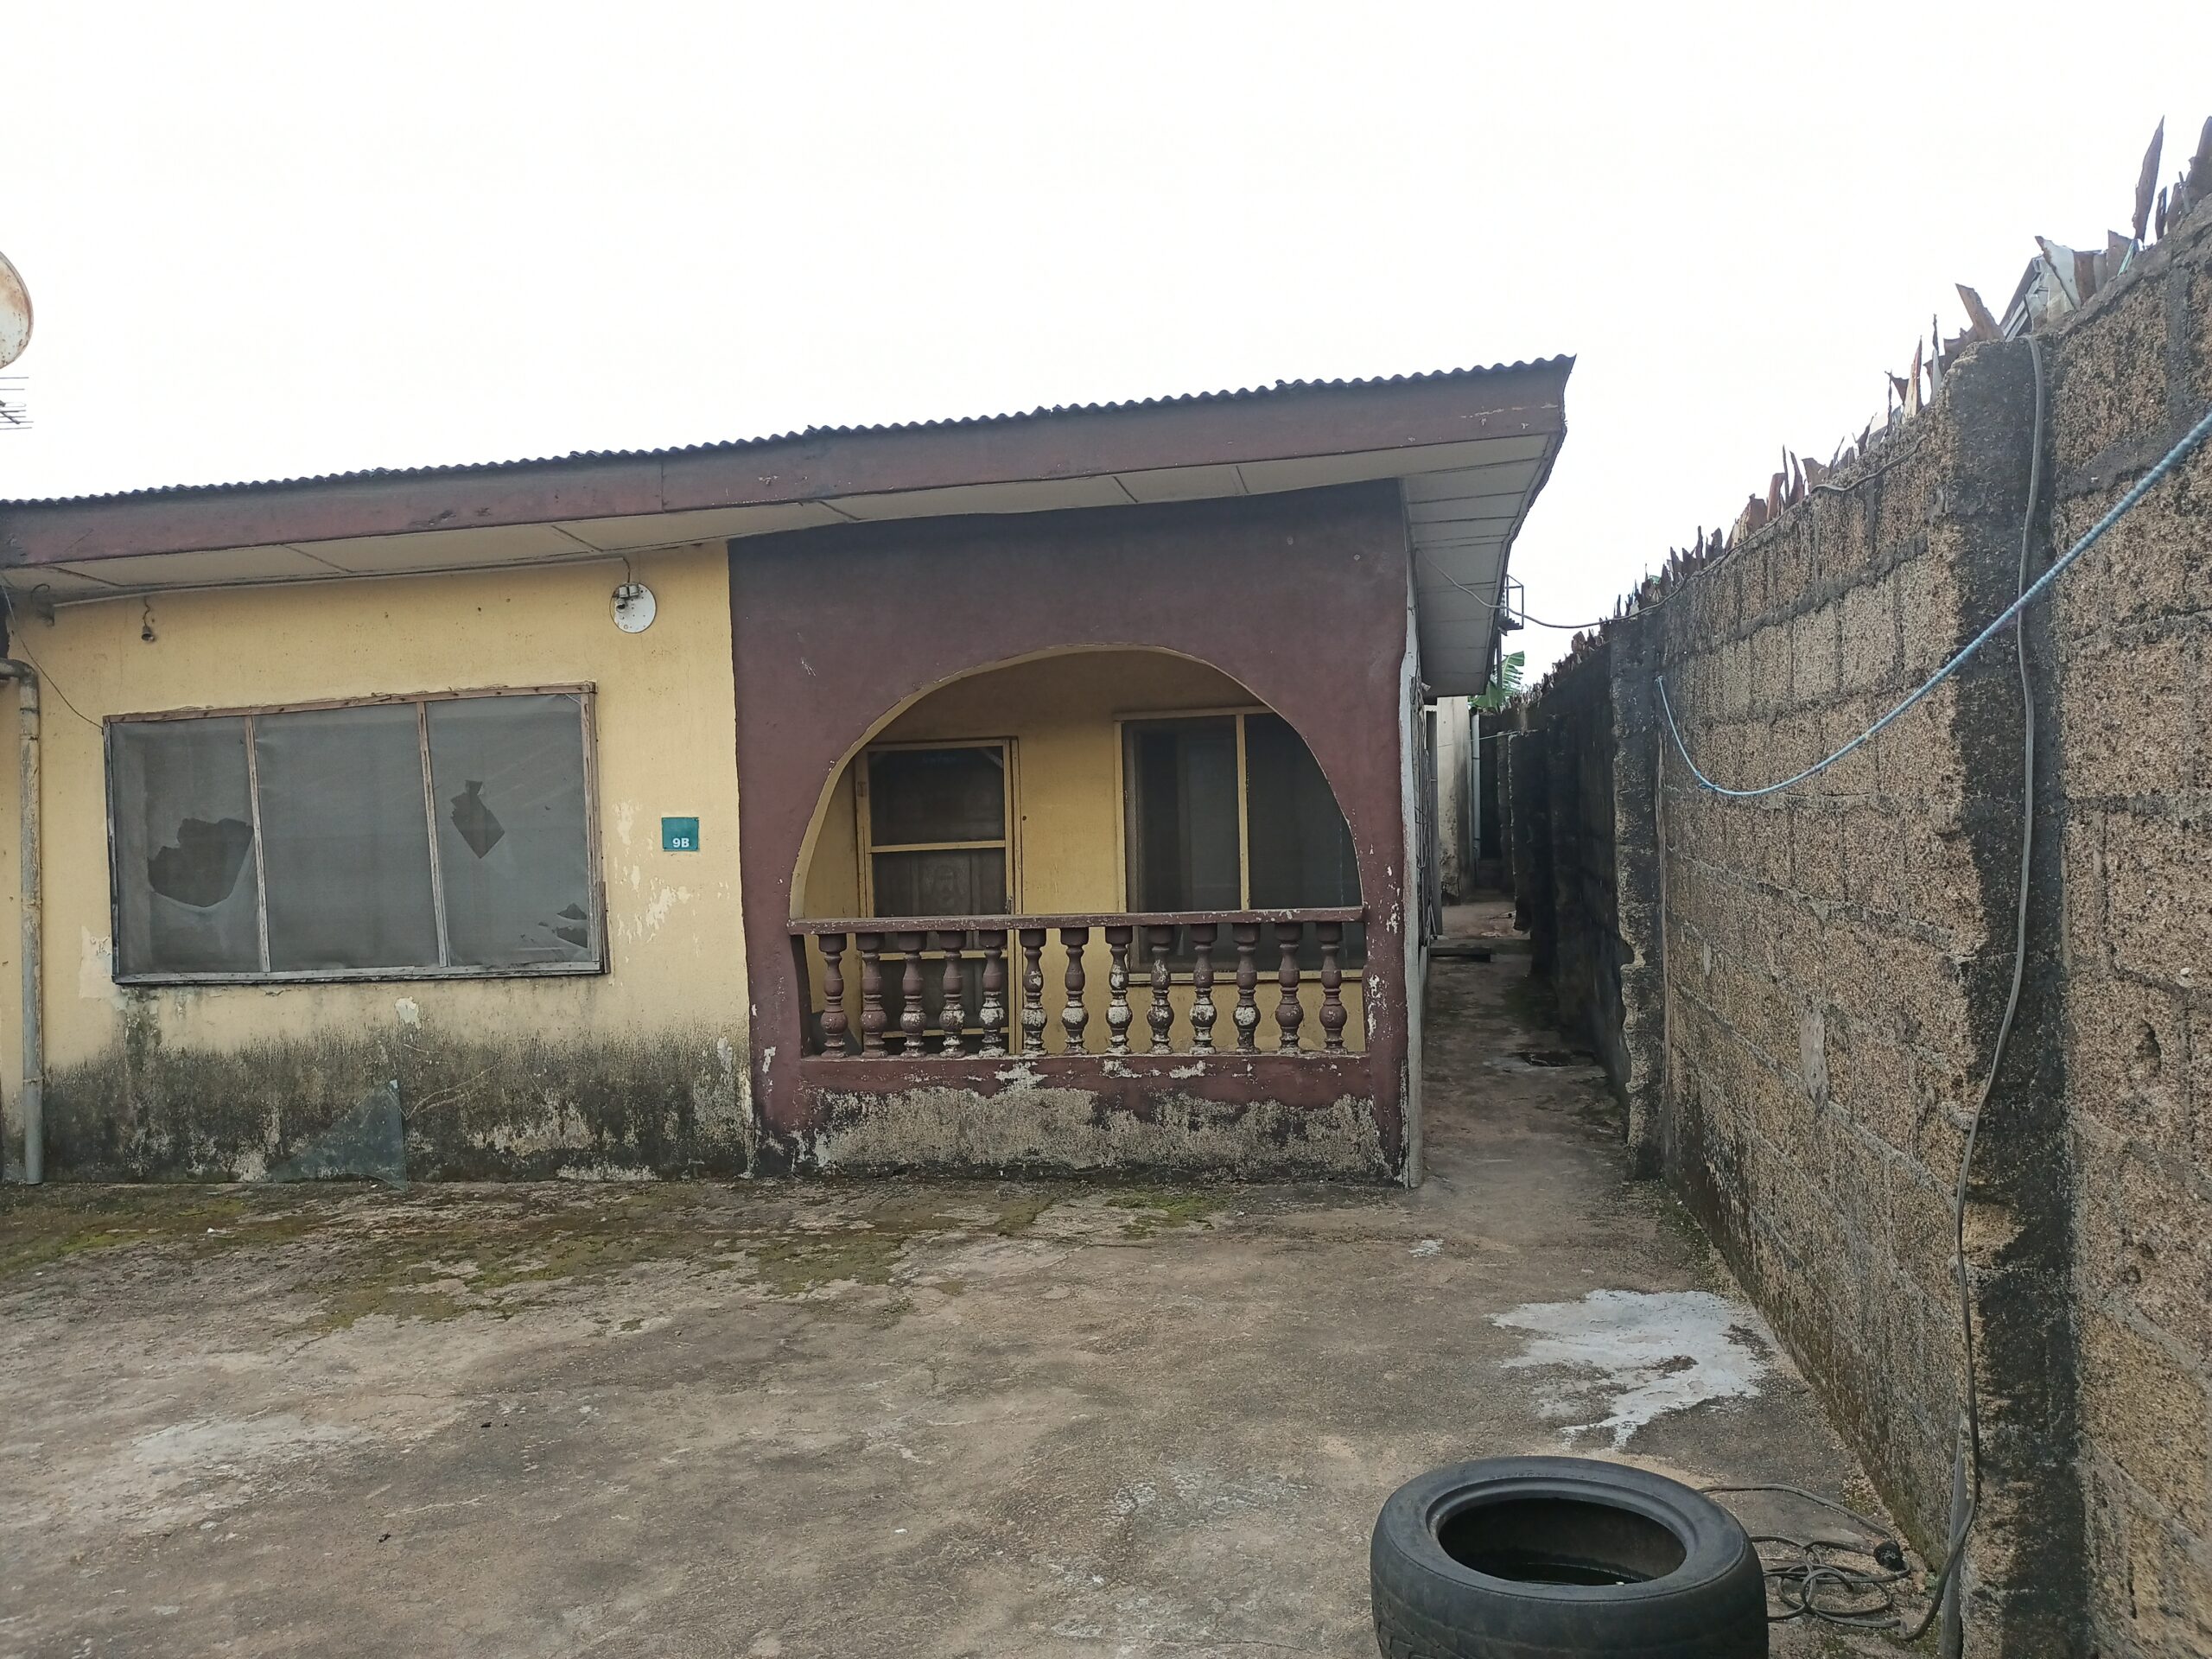 3 Bedroom Bungalow & Separate 2 Bedroom Bungalow on 500sqms at Aladinma